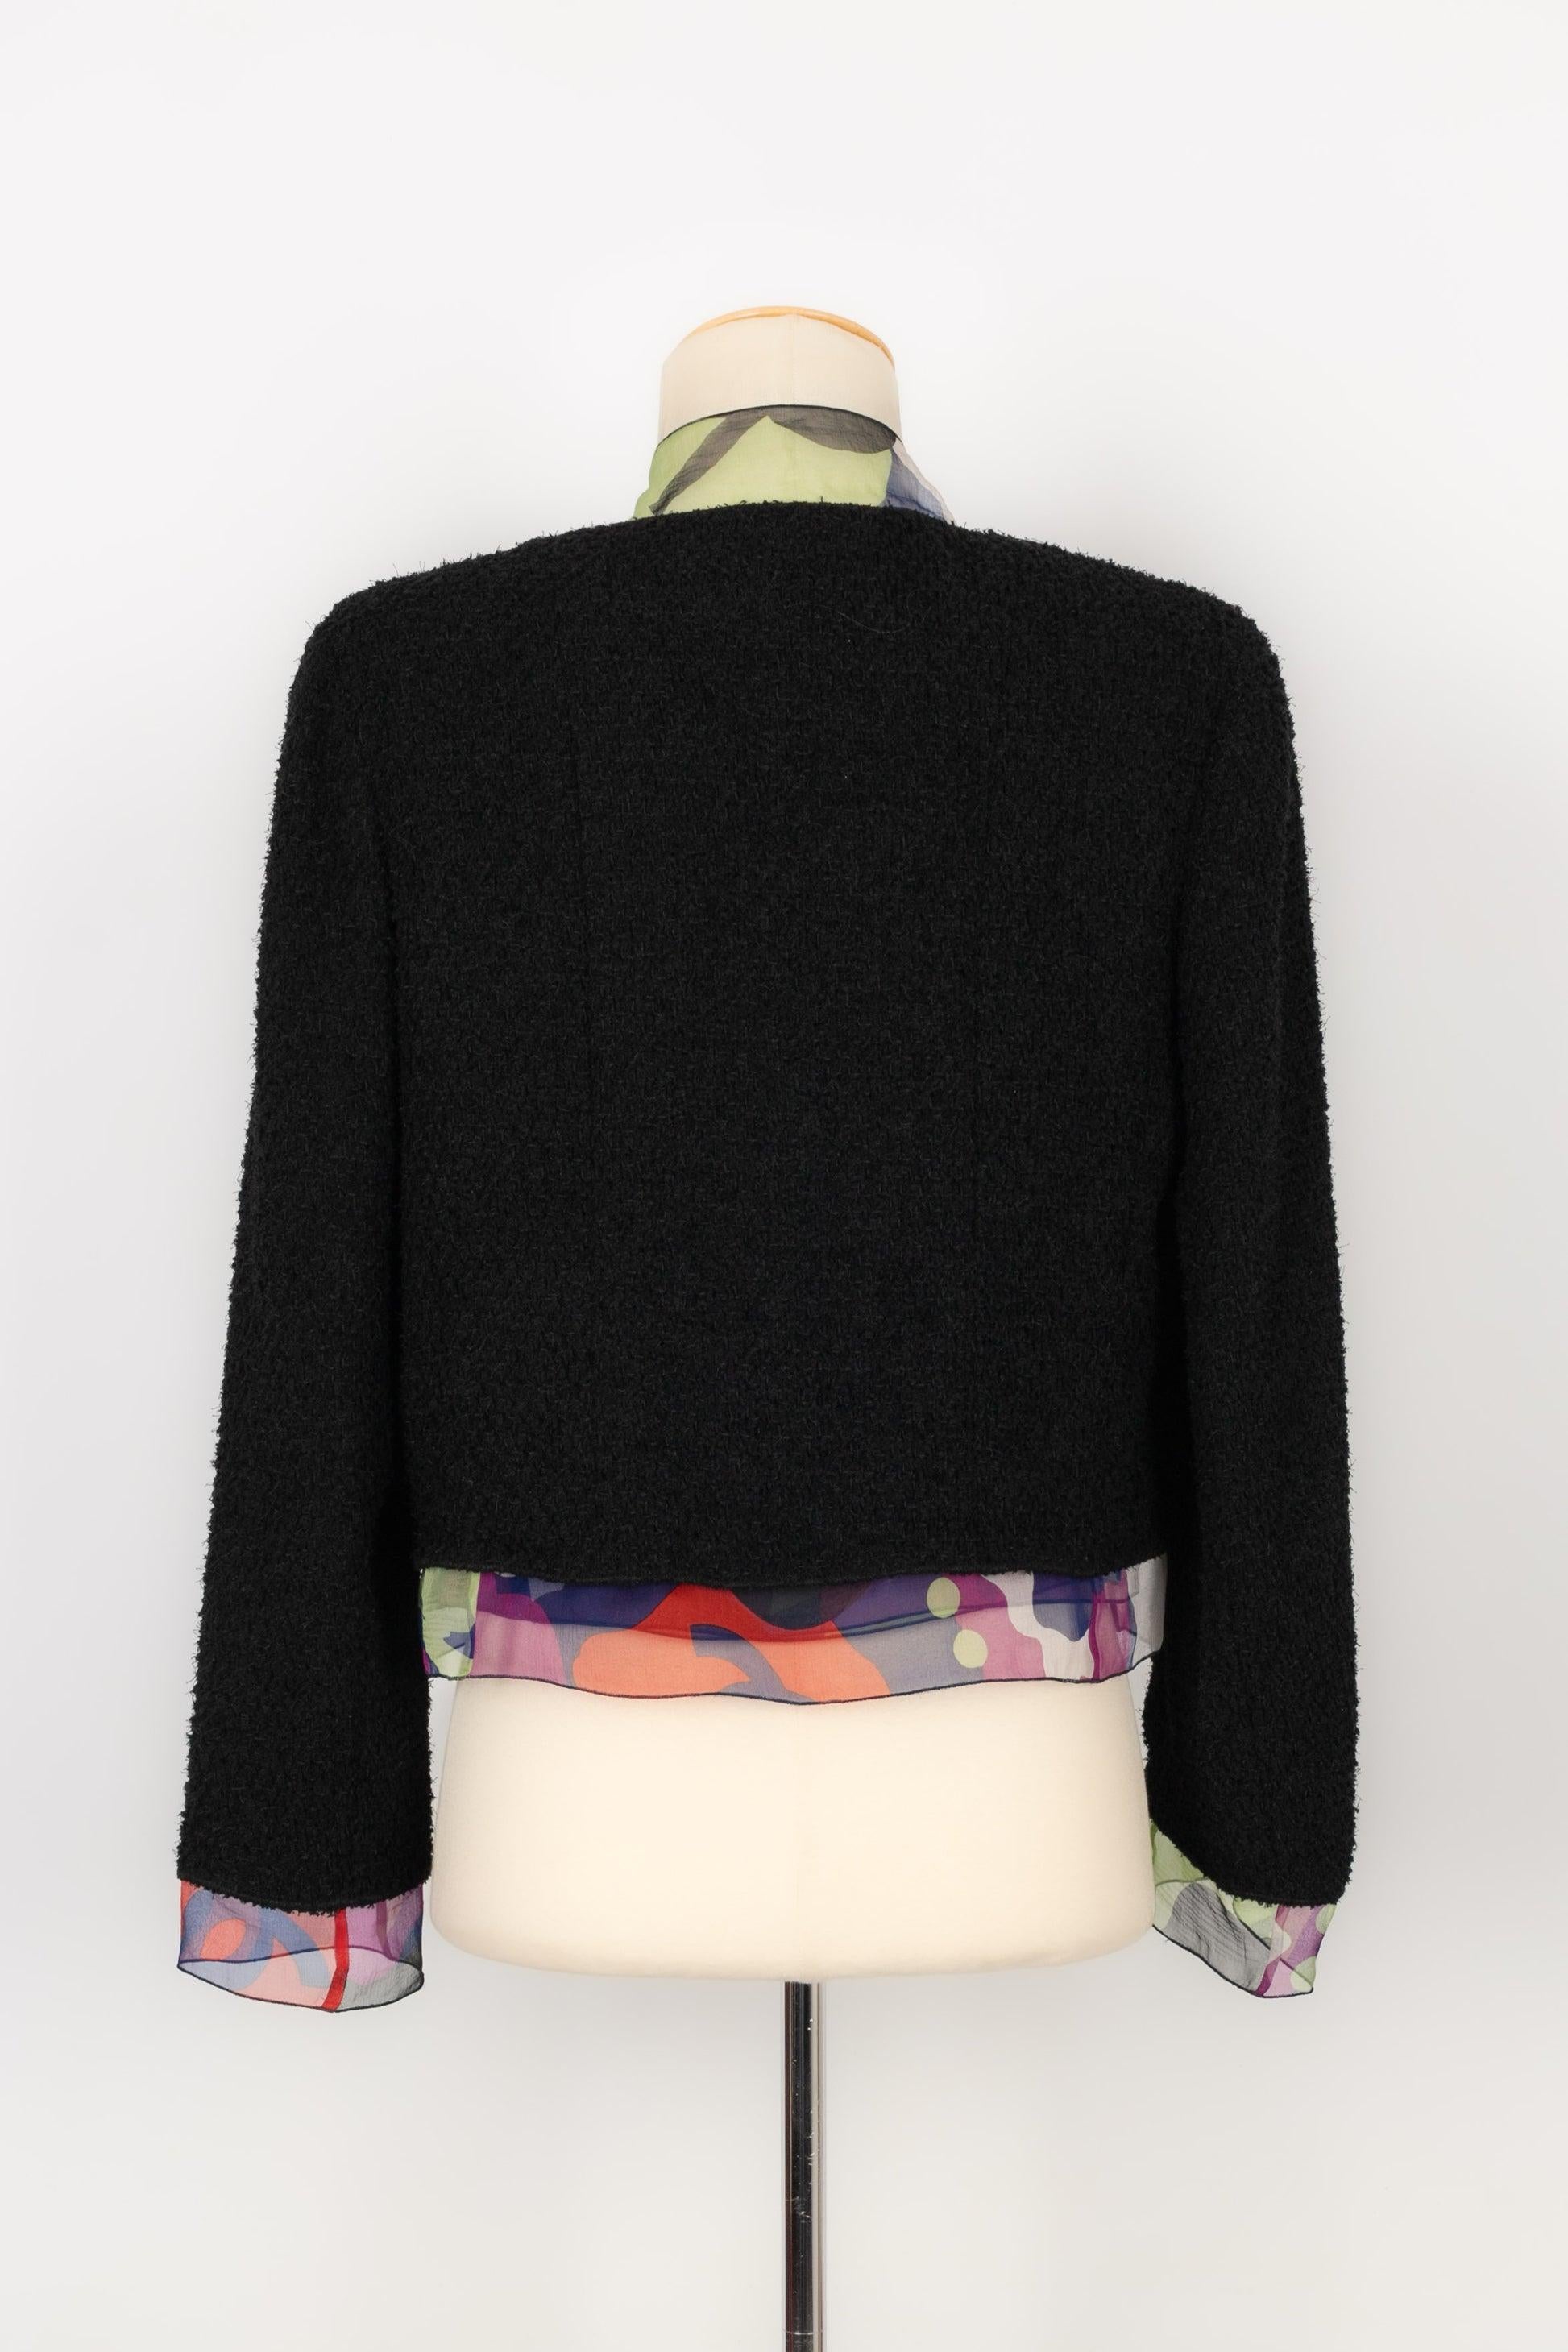 Chanel Set Composed of Black Wool Jacket Embroidered with Silk, 2000 In Excellent Condition For Sale In SAINT-OUEN-SUR-SEINE, FR